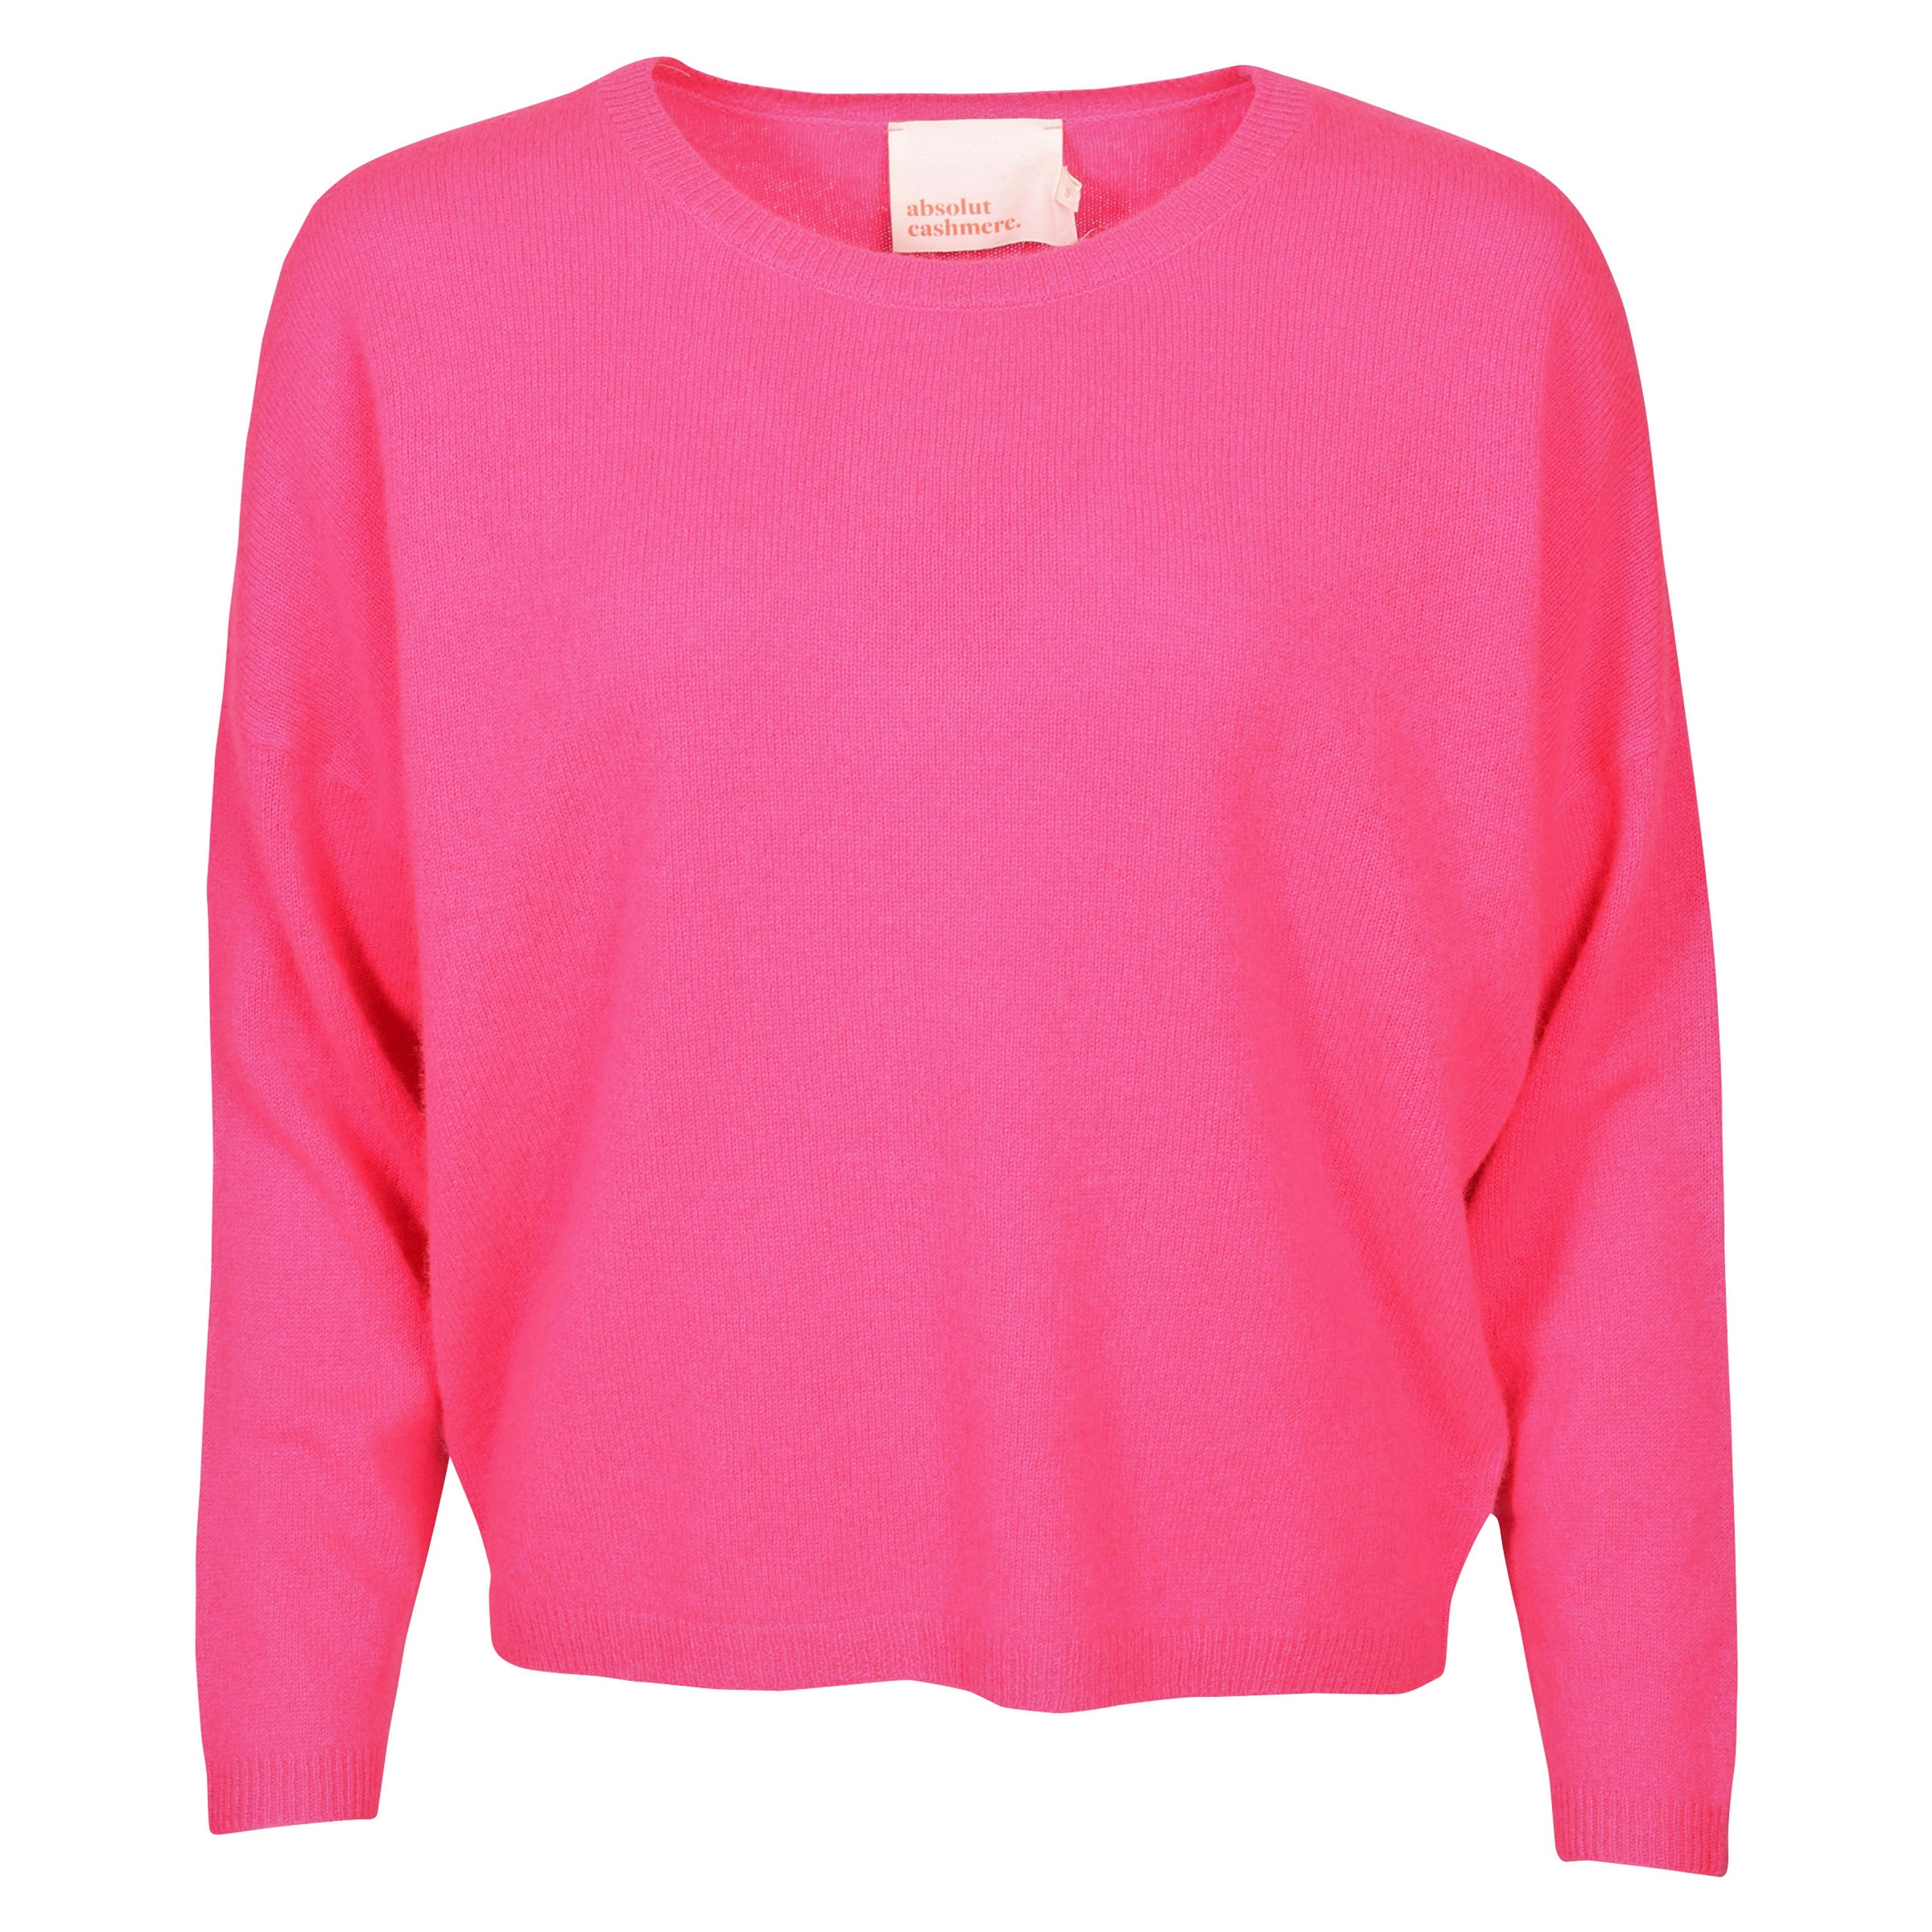 Absolut Cashmere Kaira Cashmere Pullover in Rose Fluo XS